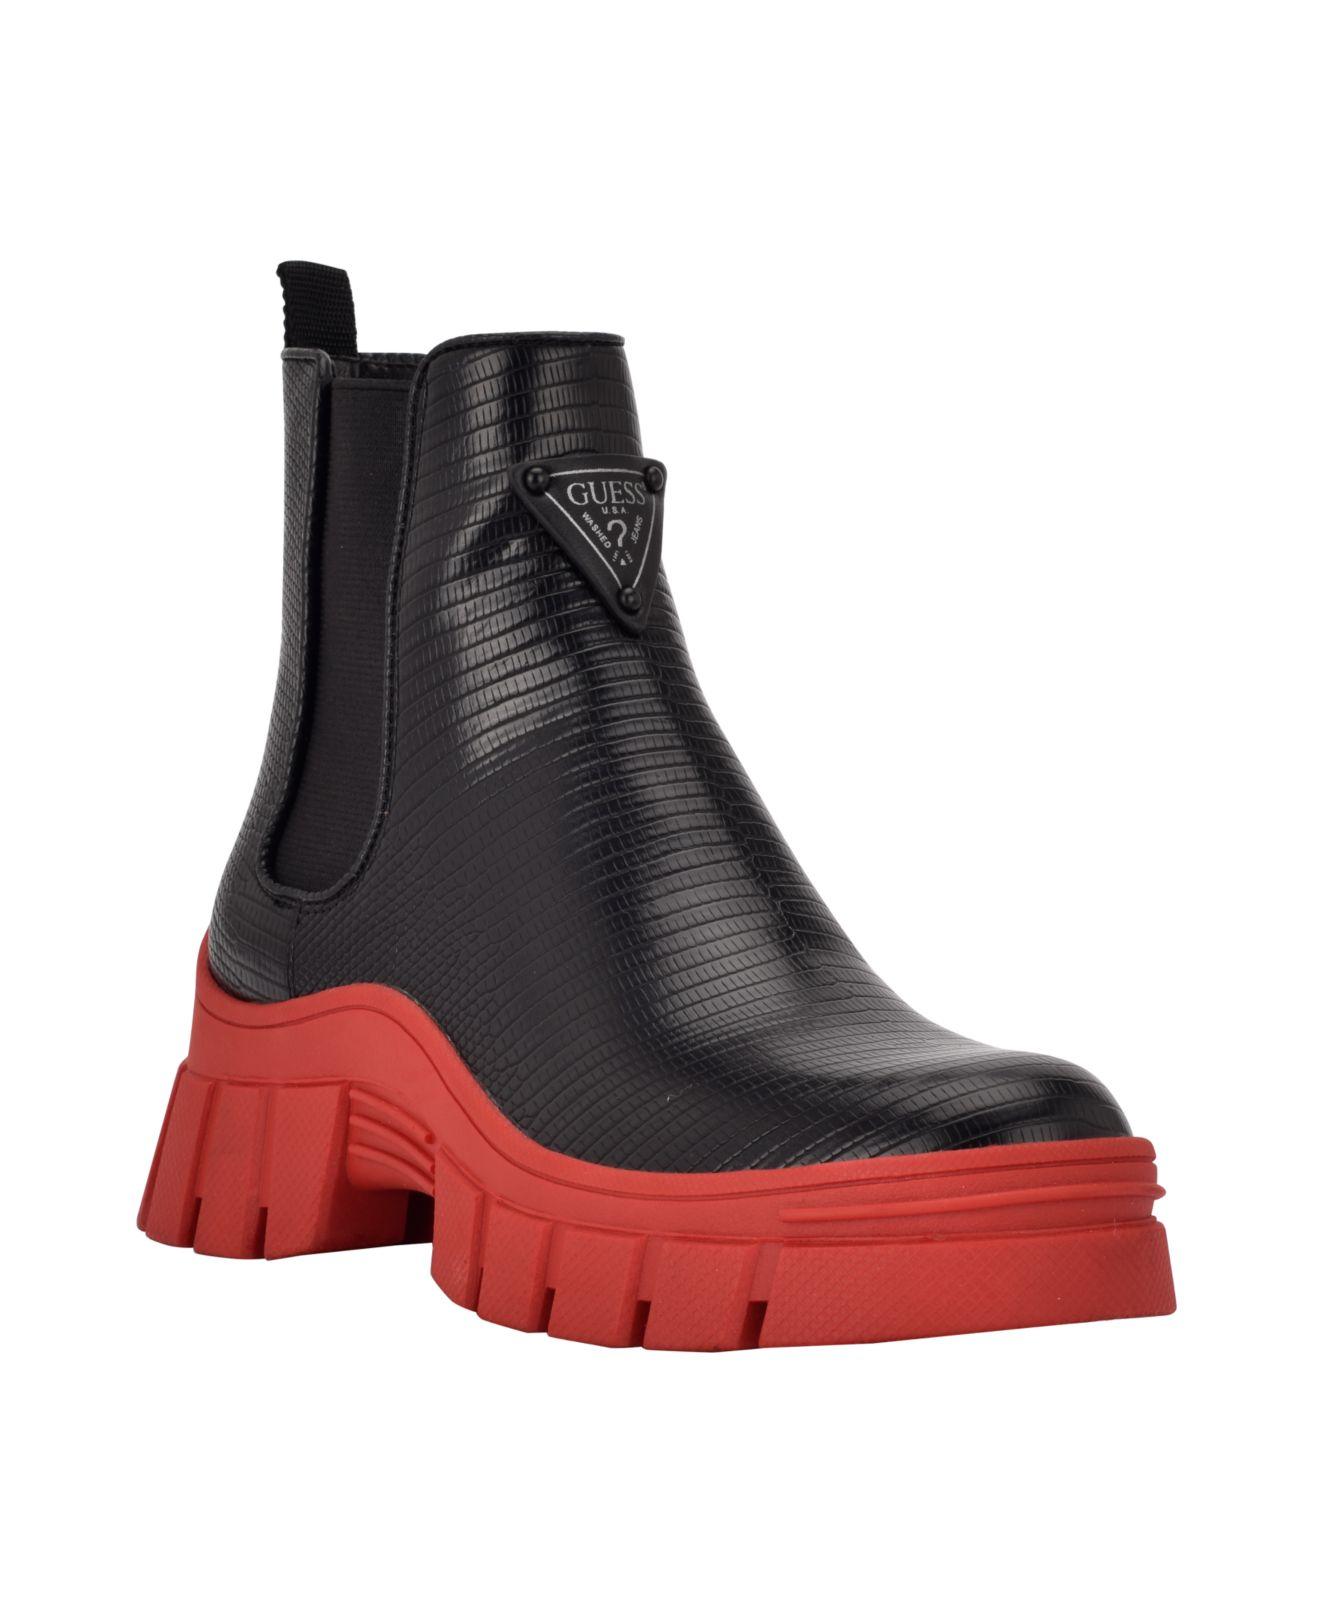 Guess Hestia Lug Sole Chelsea Booties in Red | Lyst